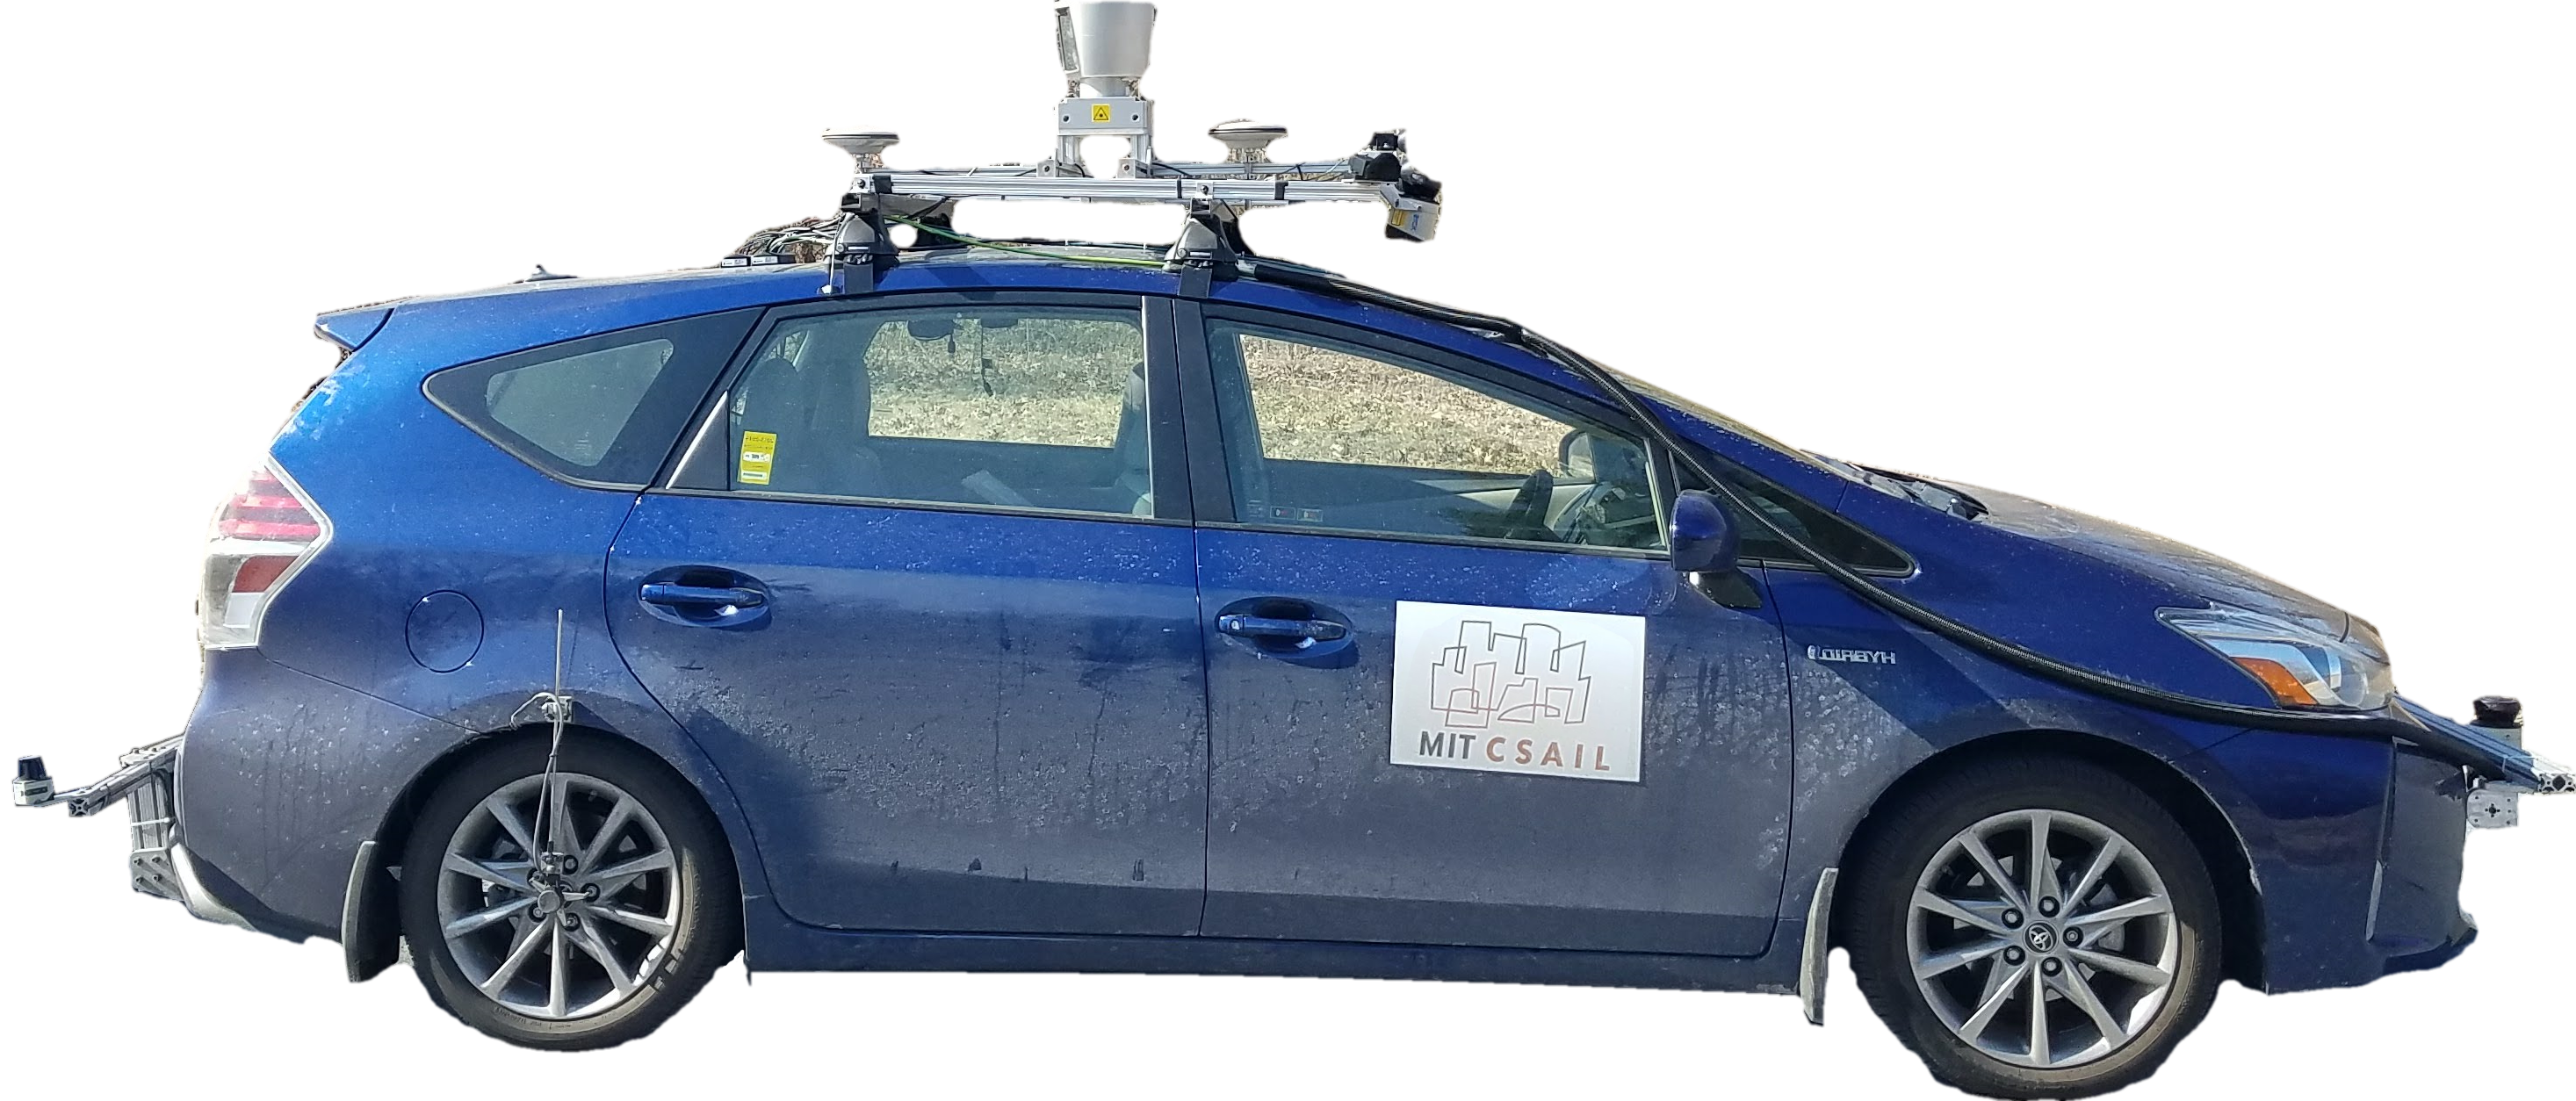 An image of the autonomous car (Toyota Prius V) used for MapLite.